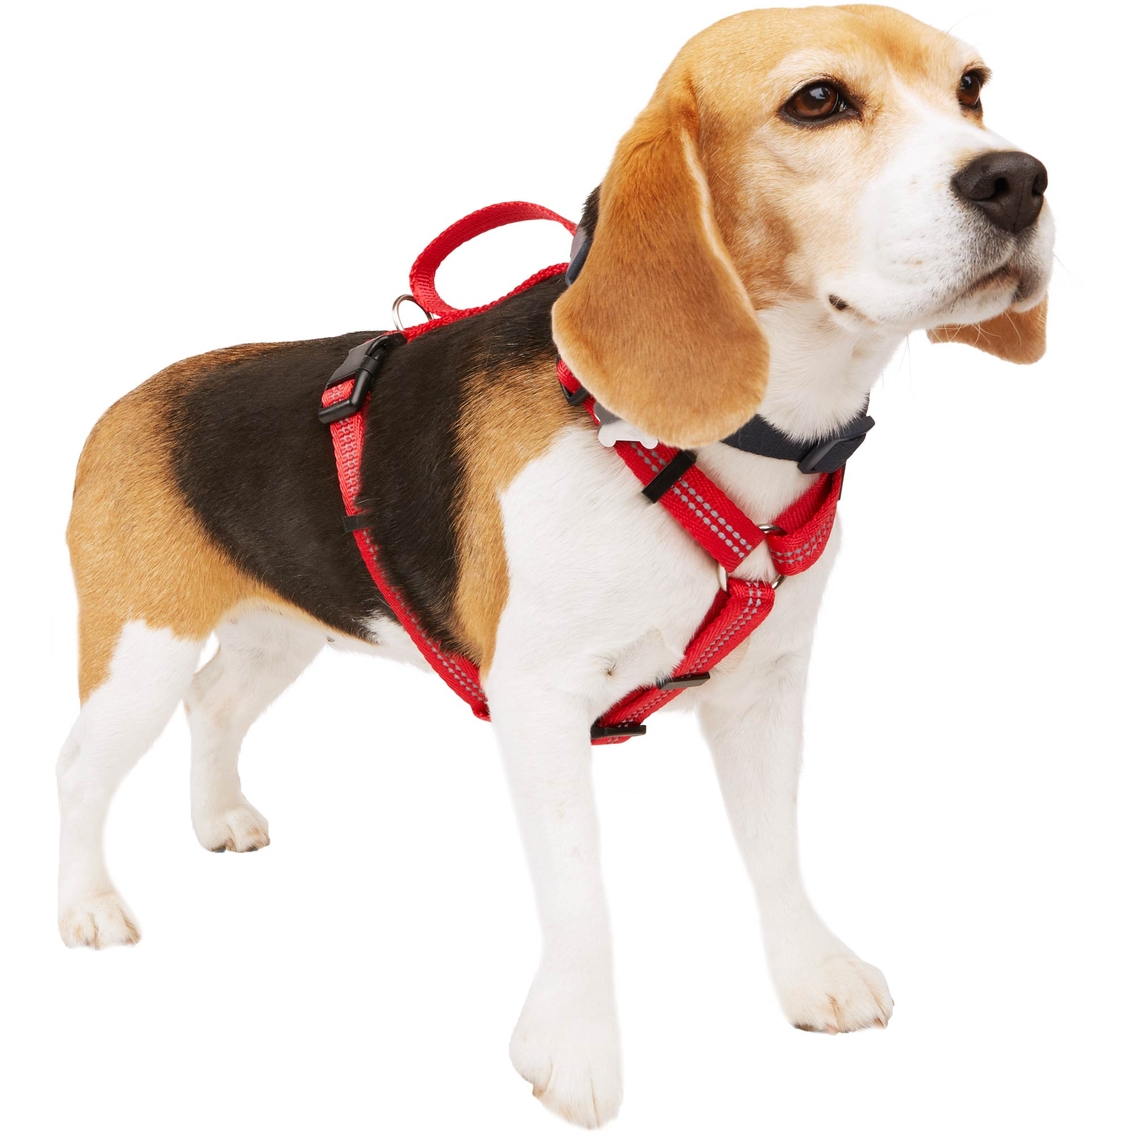 Youly Reflective Adjustable Padded Red Dog Harness, Small - Image 2 of 3